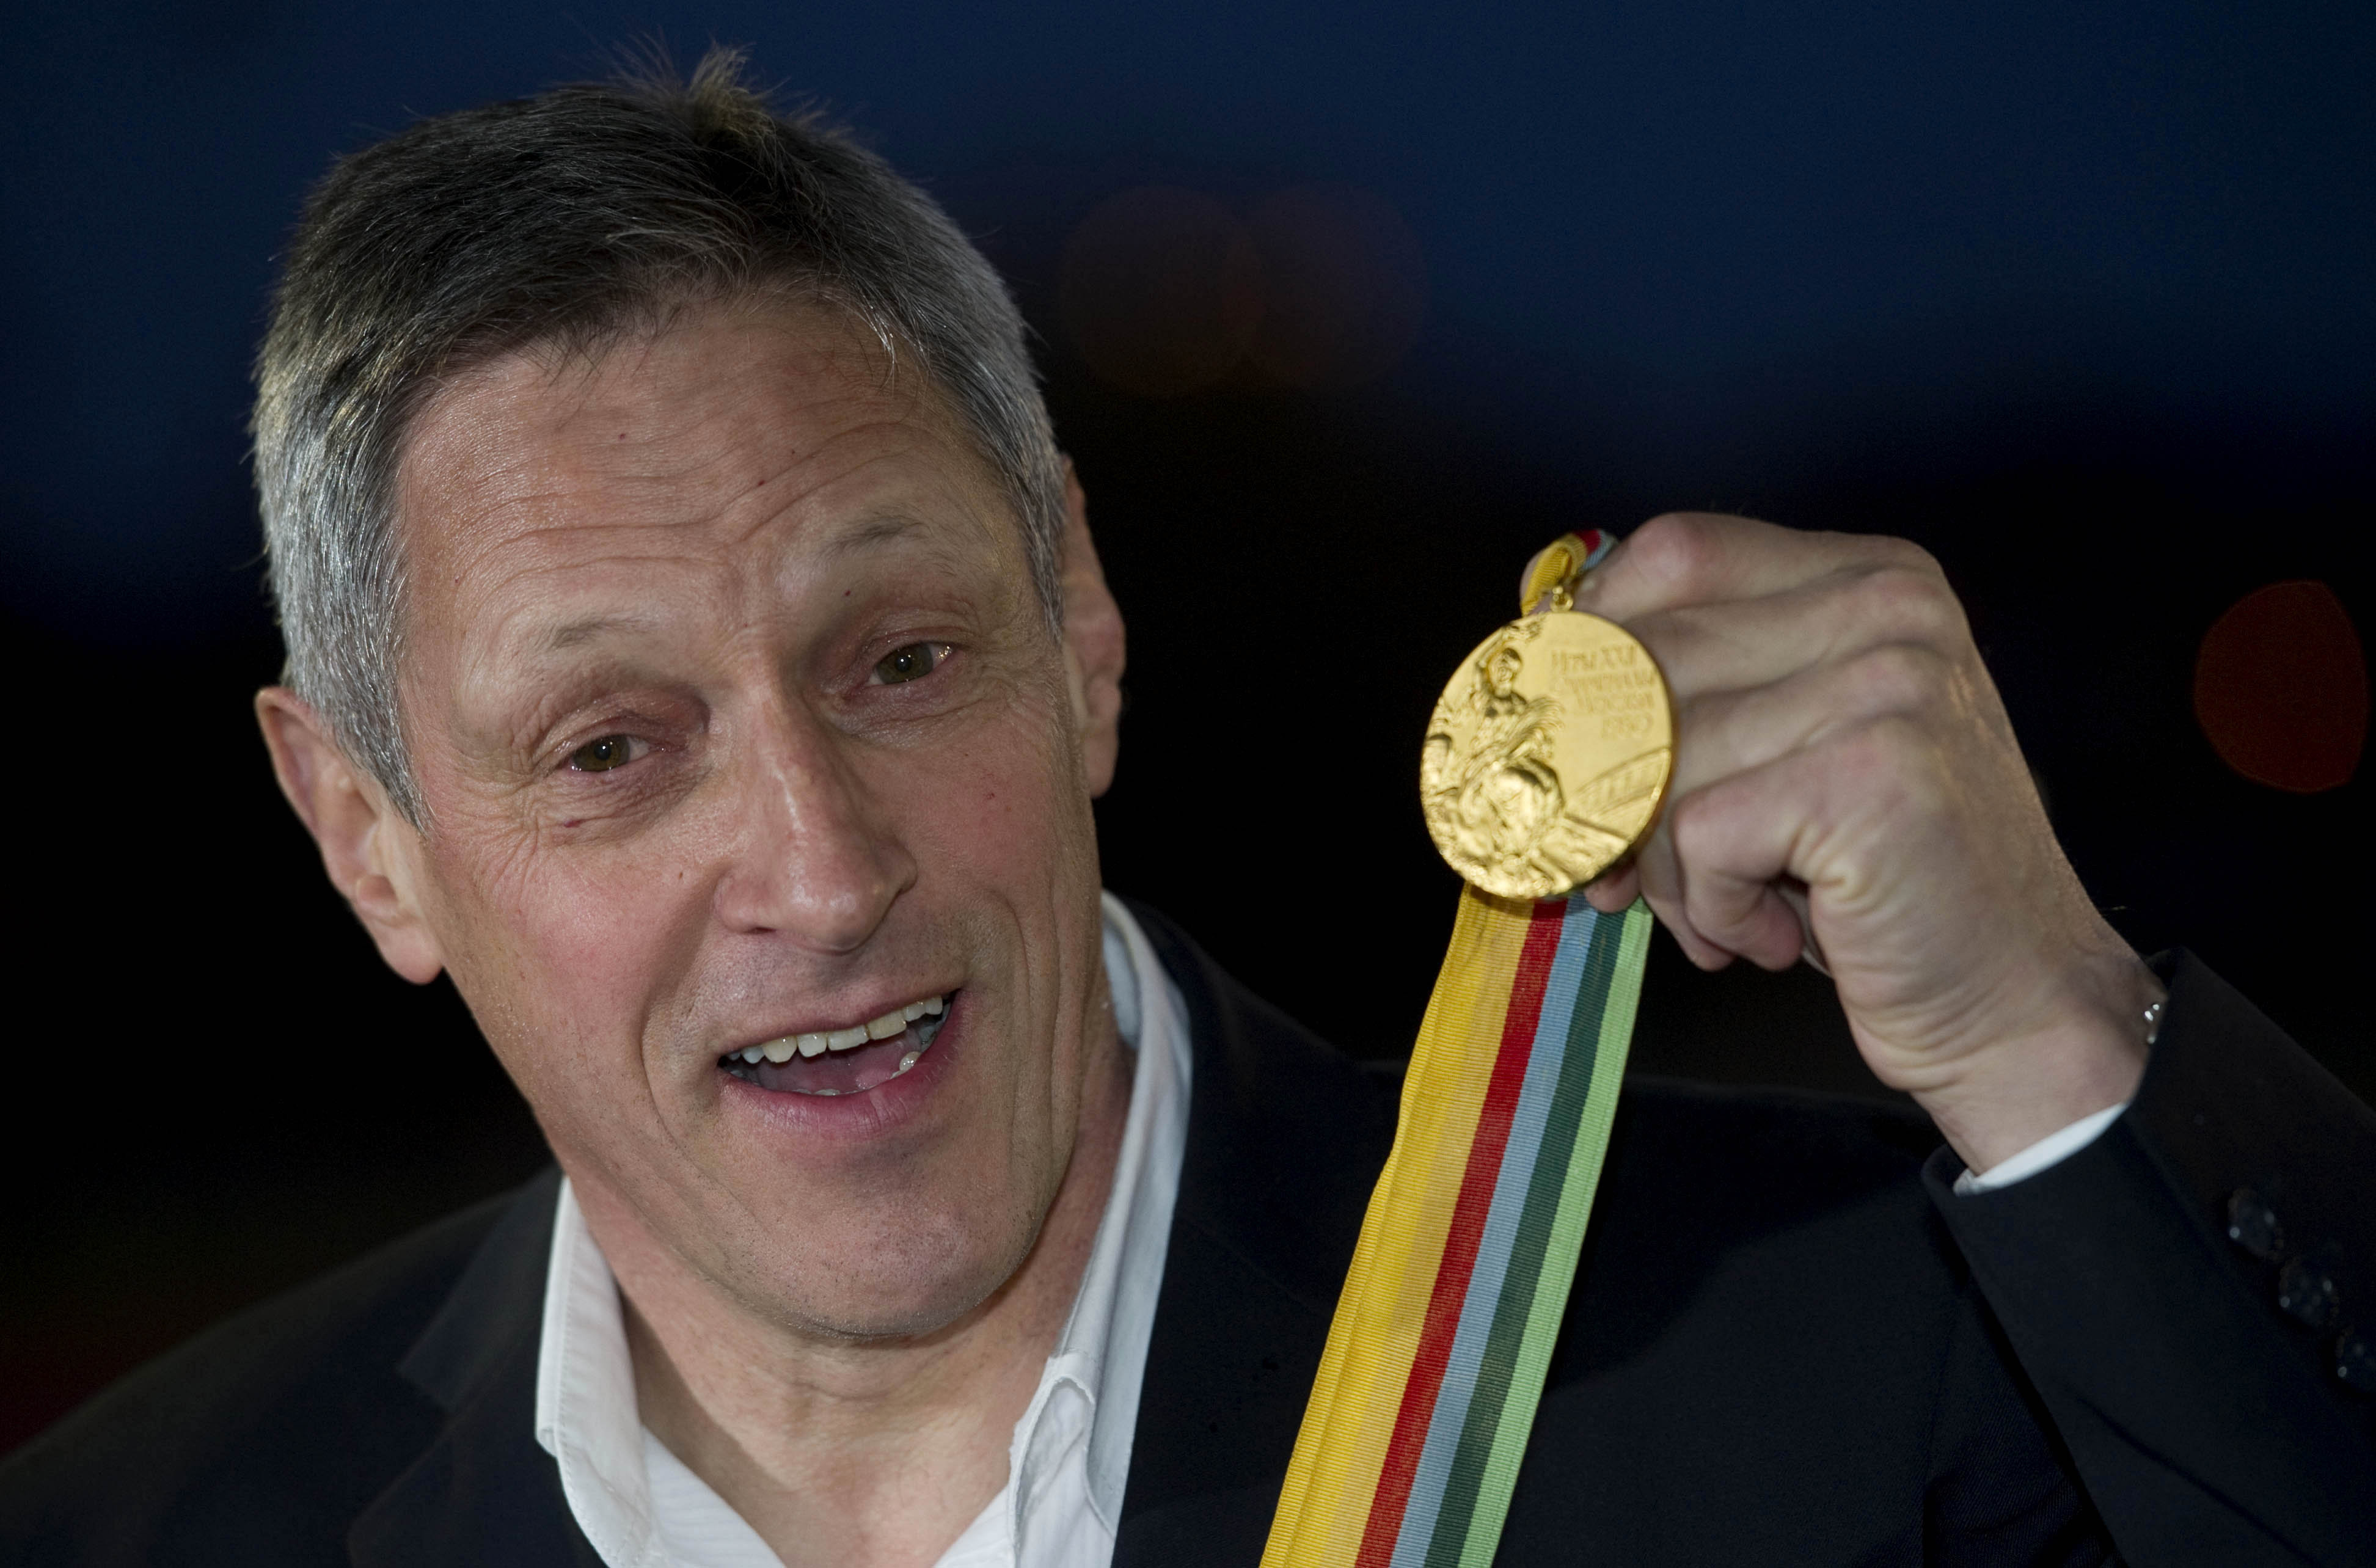 Wells with his gold medal from the 1980 Olympics in Moscow.